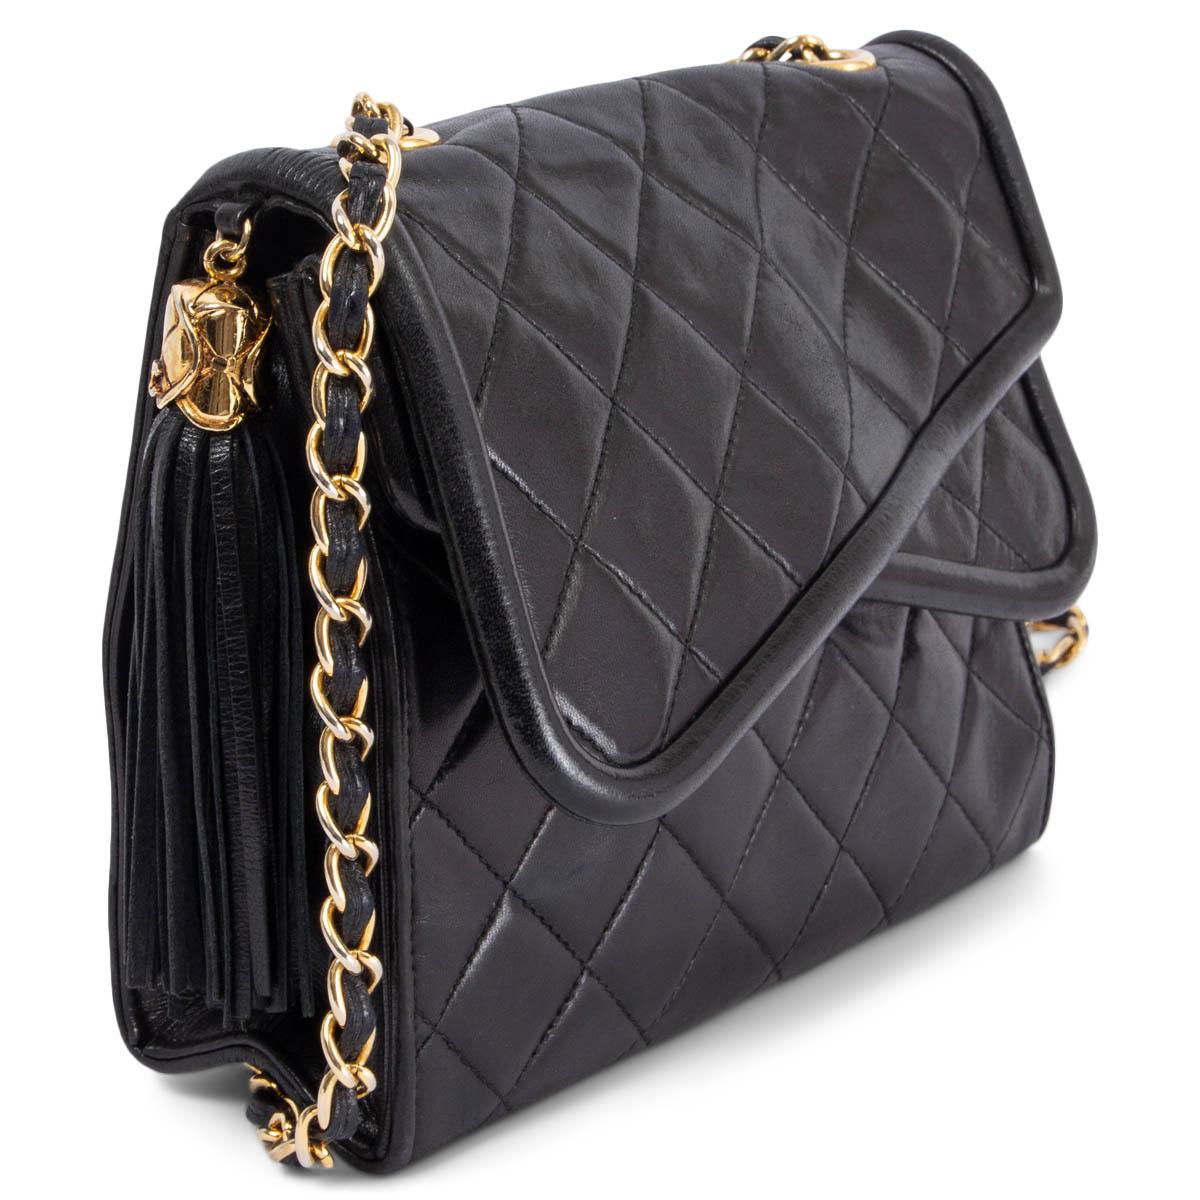 100% authentic Chanel Vintage crossover flap tassel shoulder bag in black quilted smooth lambskin and gold-tone hardware. Opens with a push-button to the main compartment and the front pocket. The interior is lined in calfskin with one zip pocket